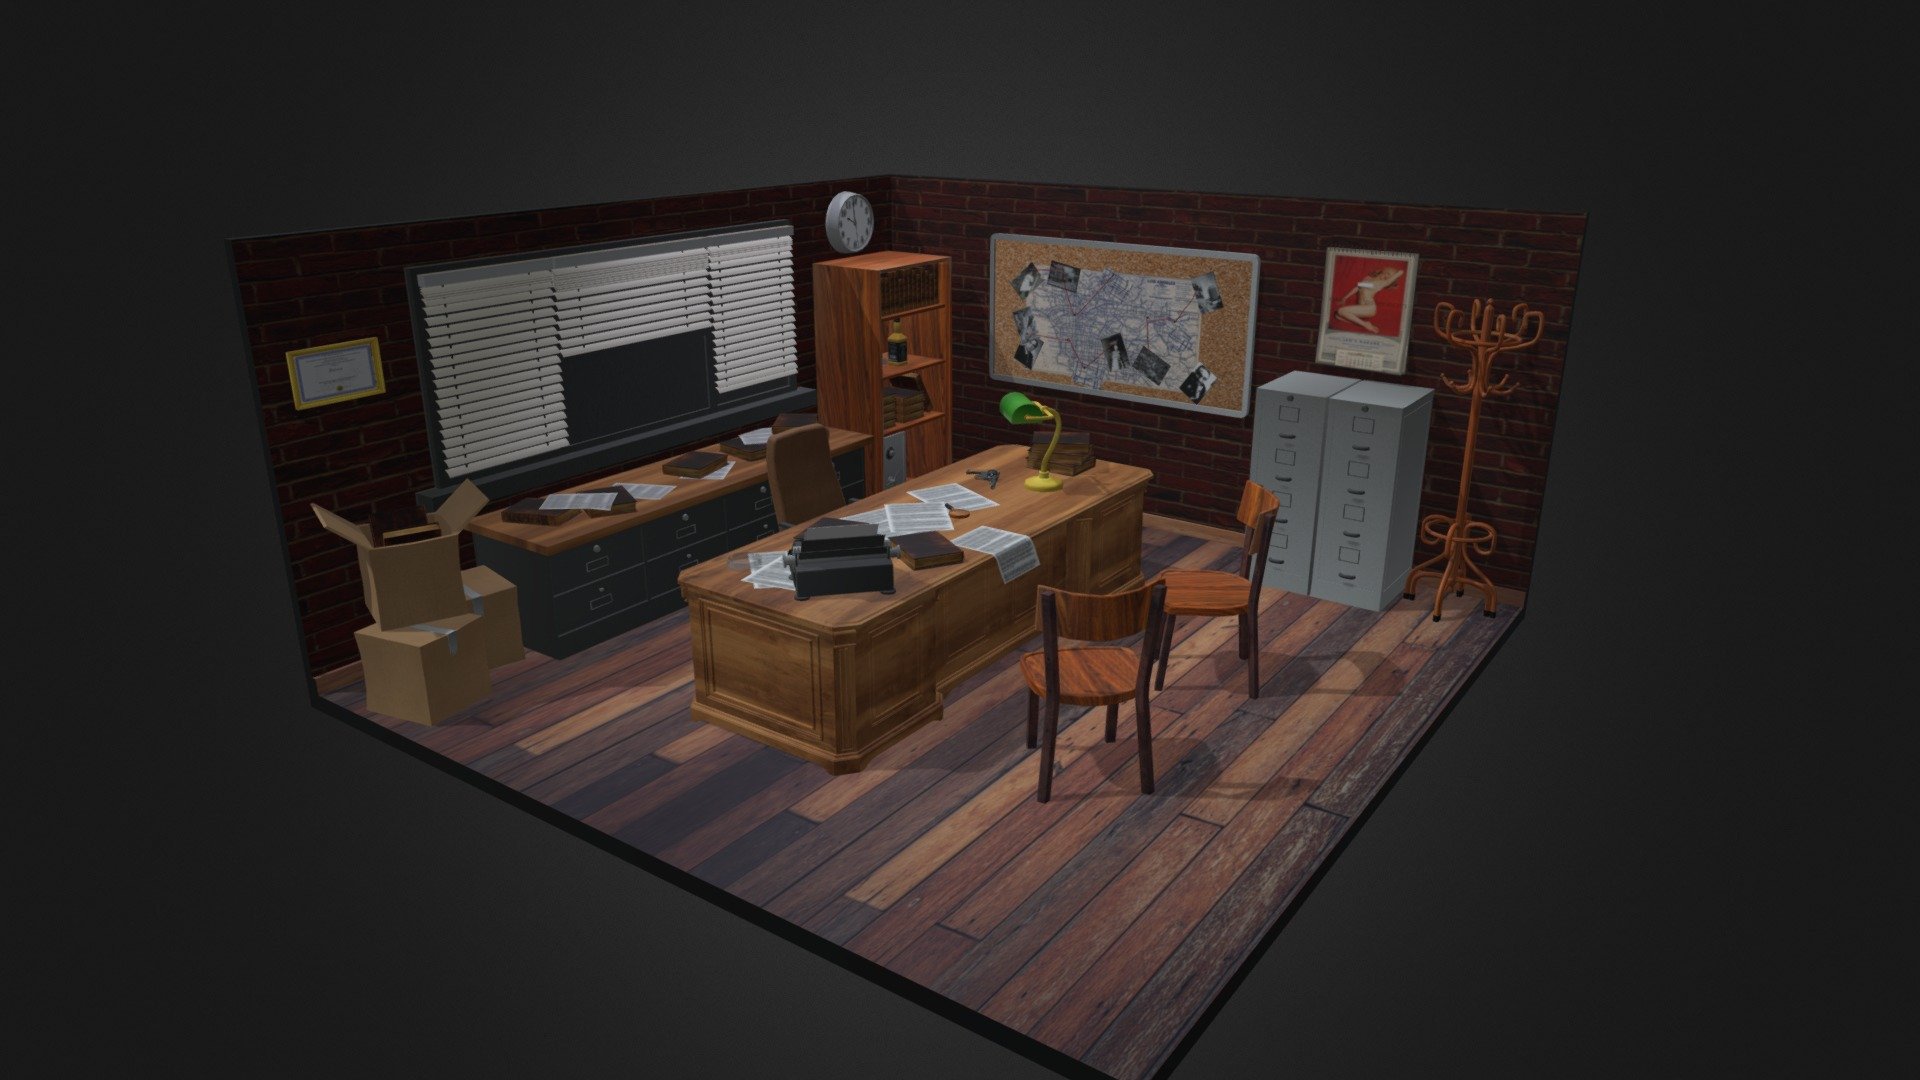 Diorama Detective Office 1950s made with an Atlas - Diorama Detective Office 1950s - 3D model by C00KI 3d model